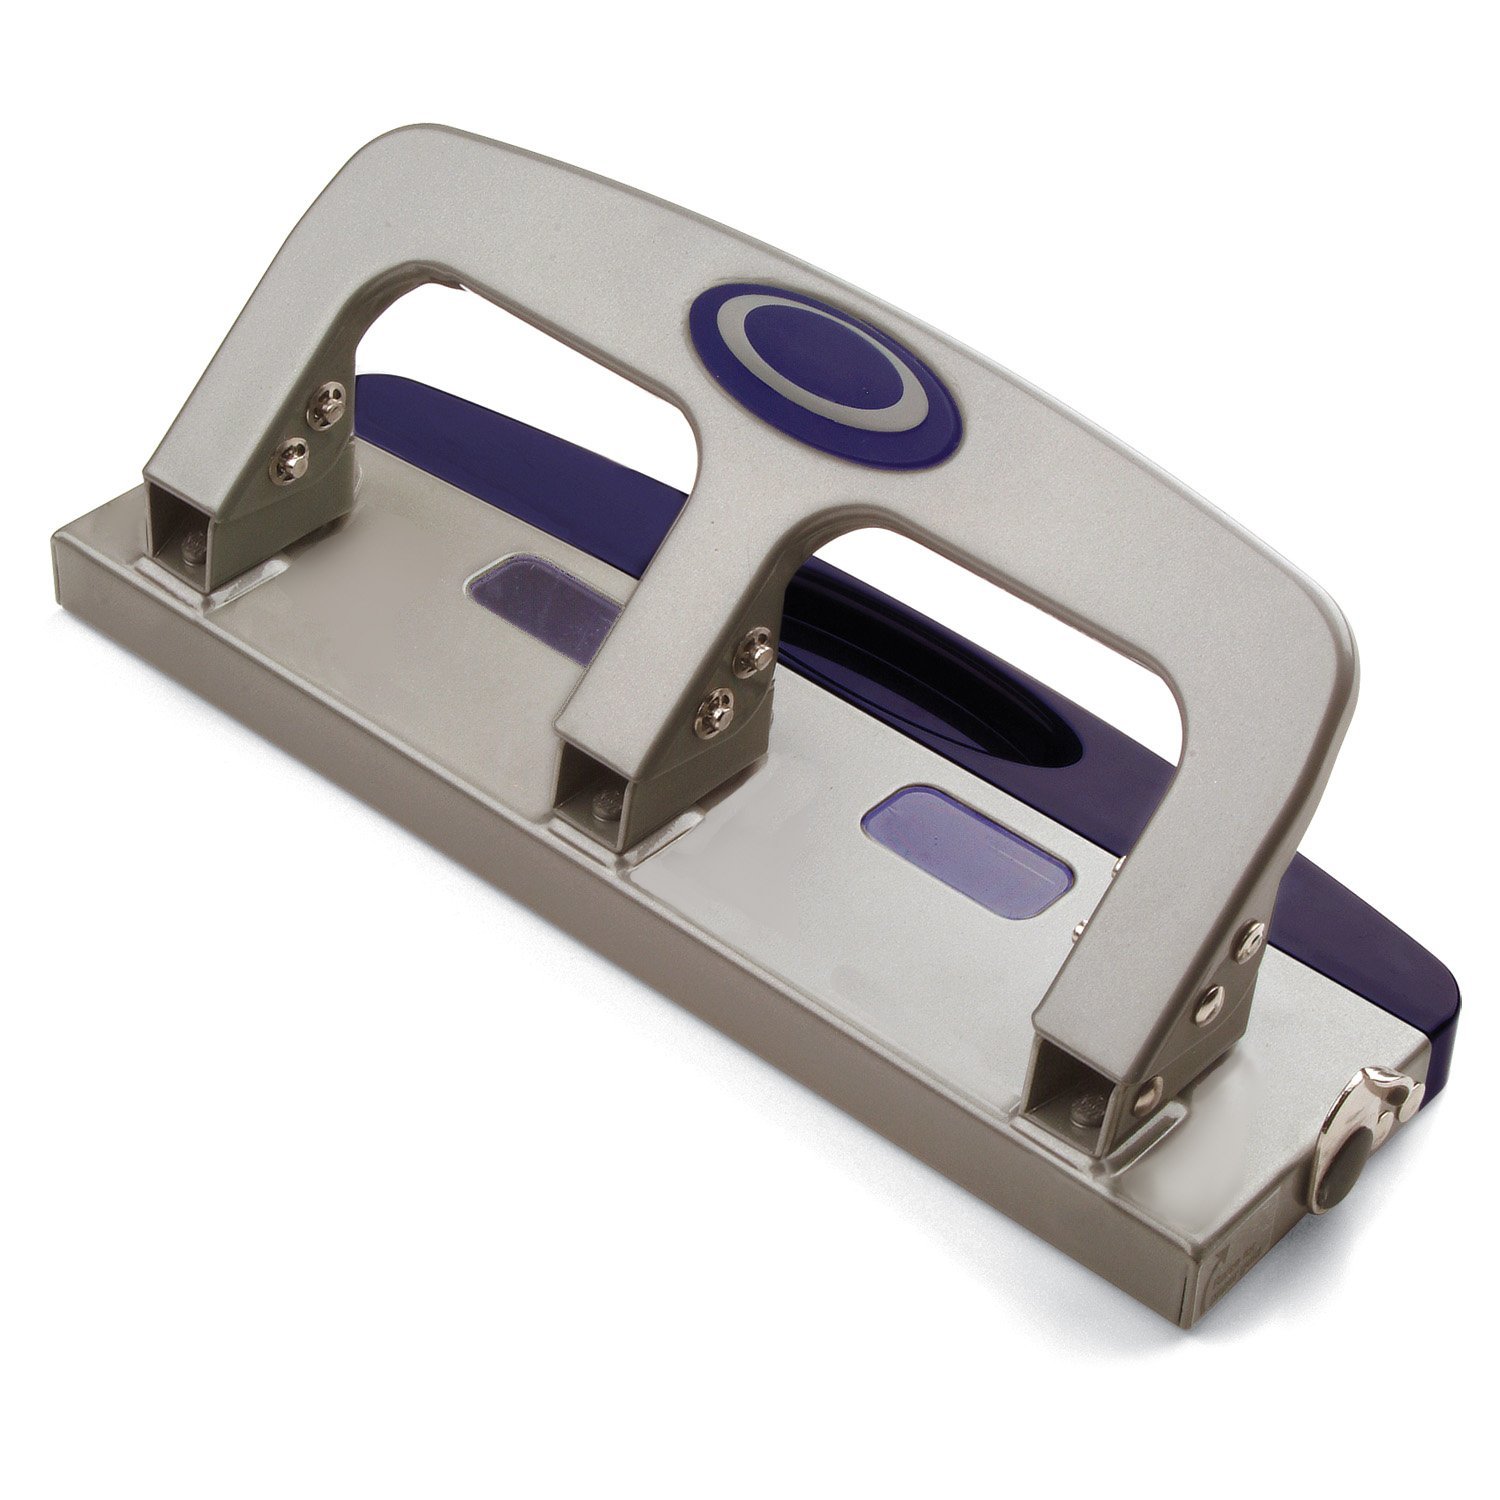 Deluxe Medium Duty 3-Hole Punch with Chip Drawer, Silver and Navy, 20-Sheet Capacity 